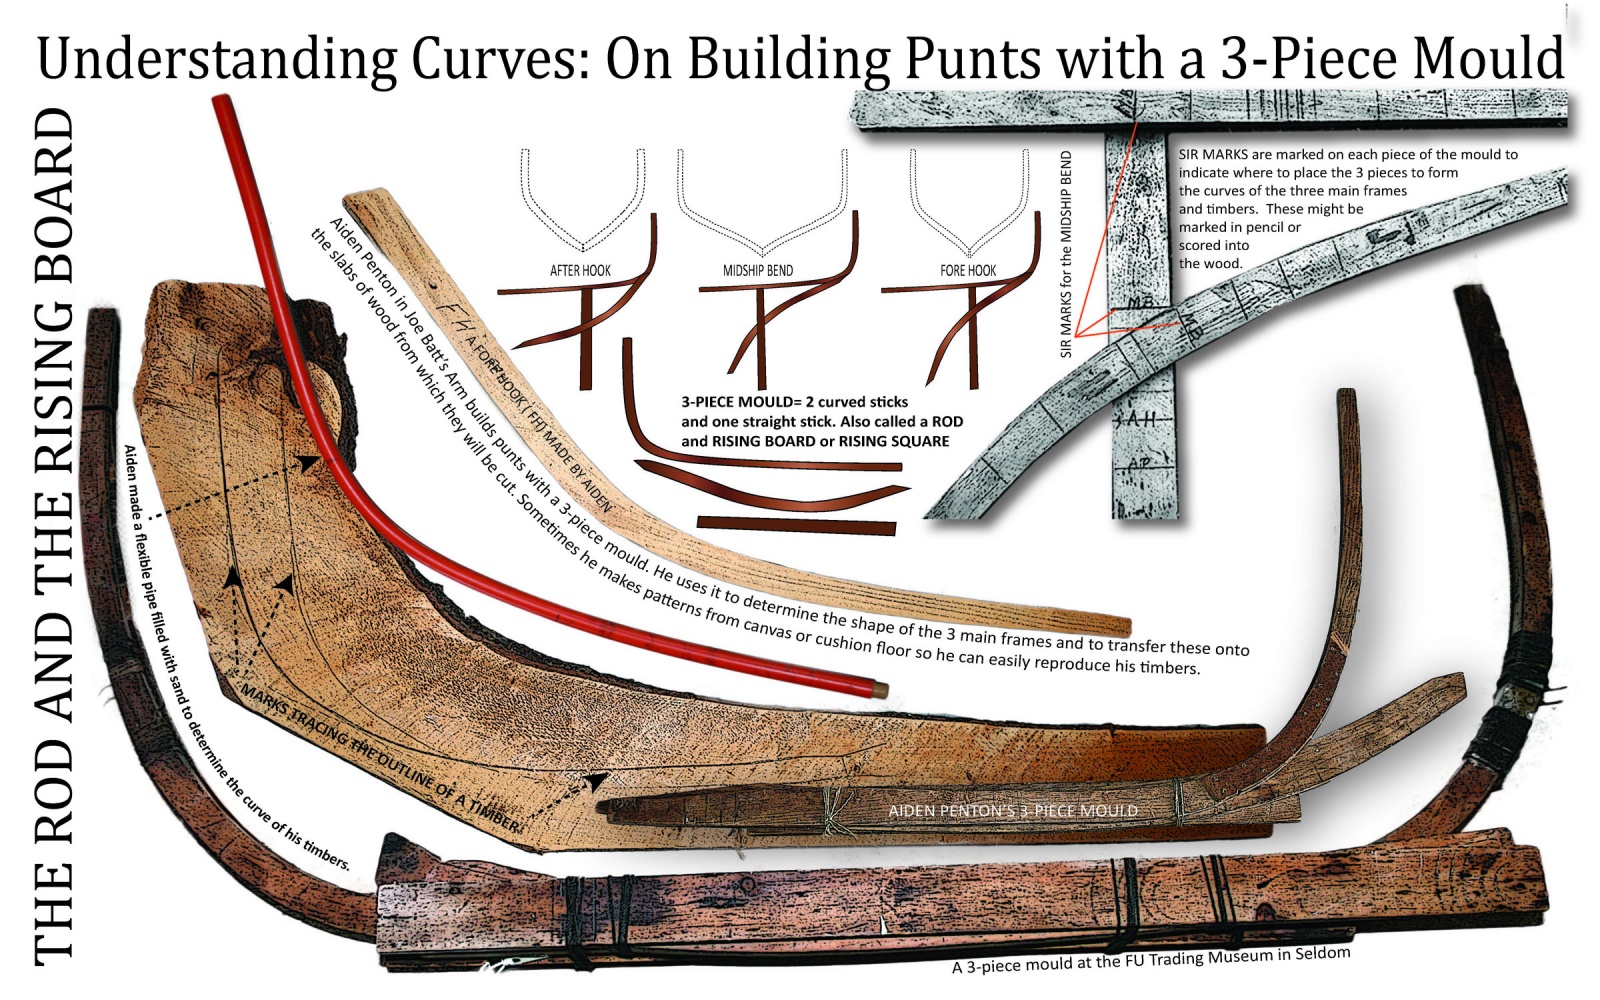 Understanding Curves: On Building Punts with a 3-Piece Mould